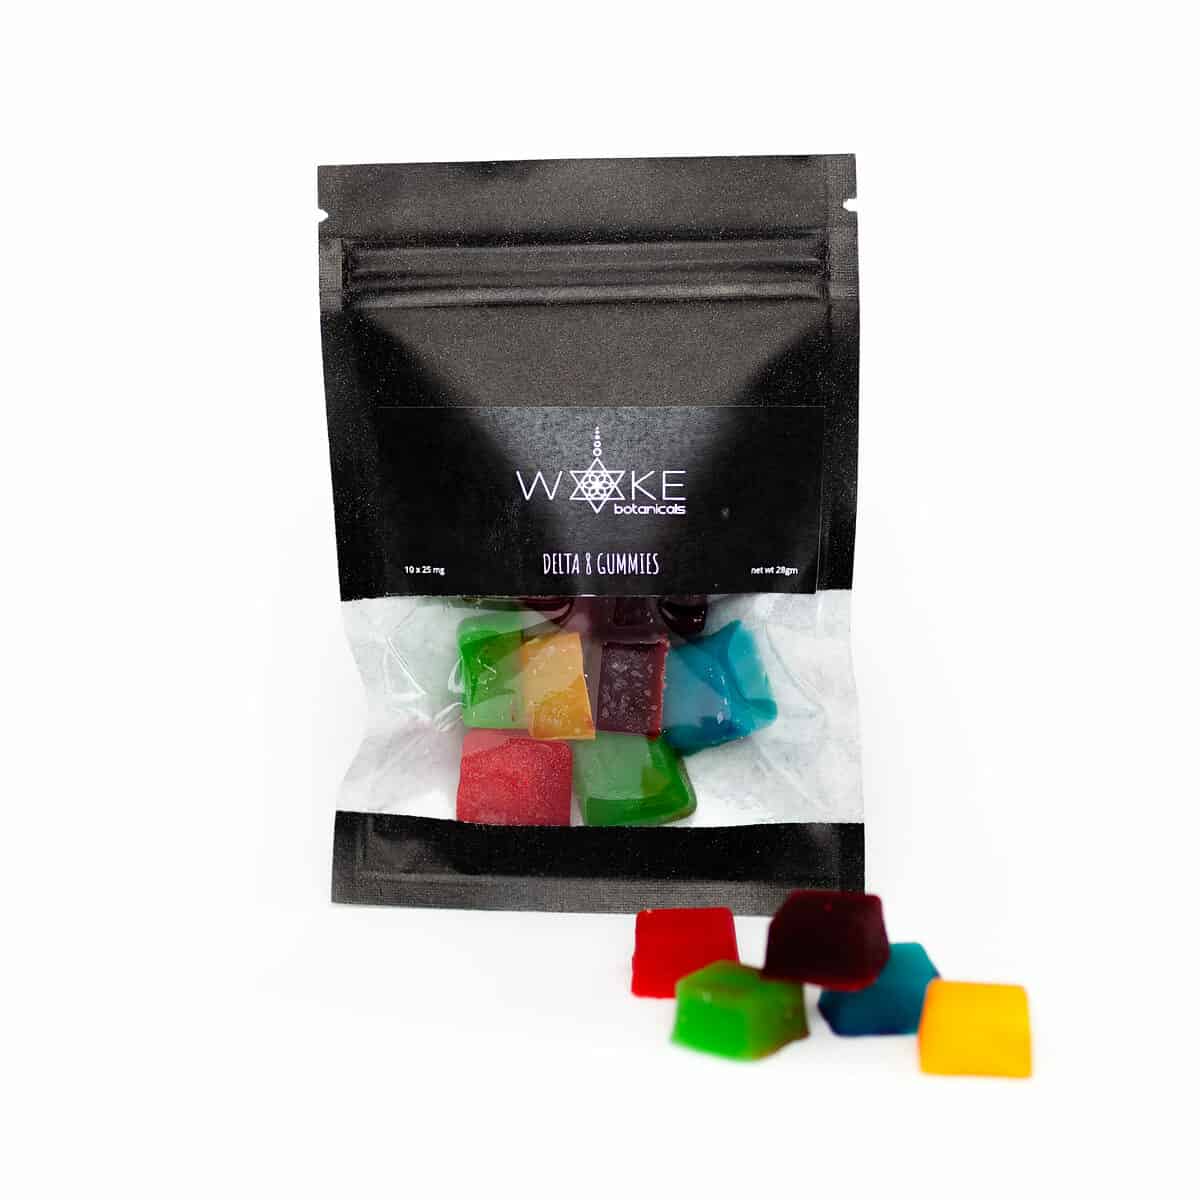 One package of delta 8 gummies from woke botanicals